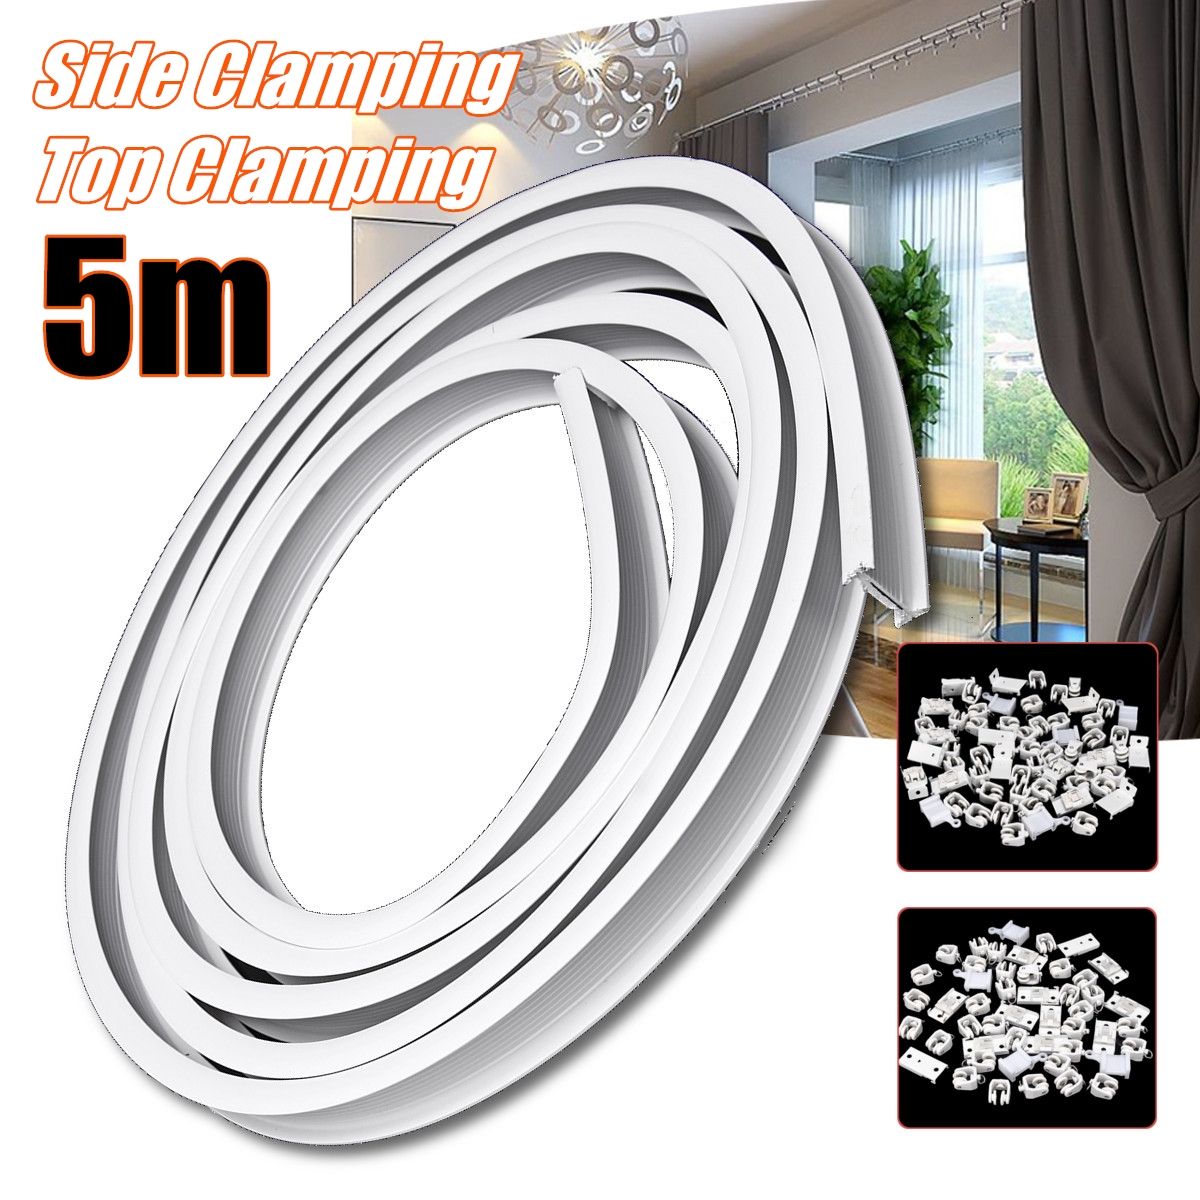 5M-Curtains-Track-Rail-Flexible-Ceiling-Mounted-For-Straight-Slide-Window-Balcony-1349665